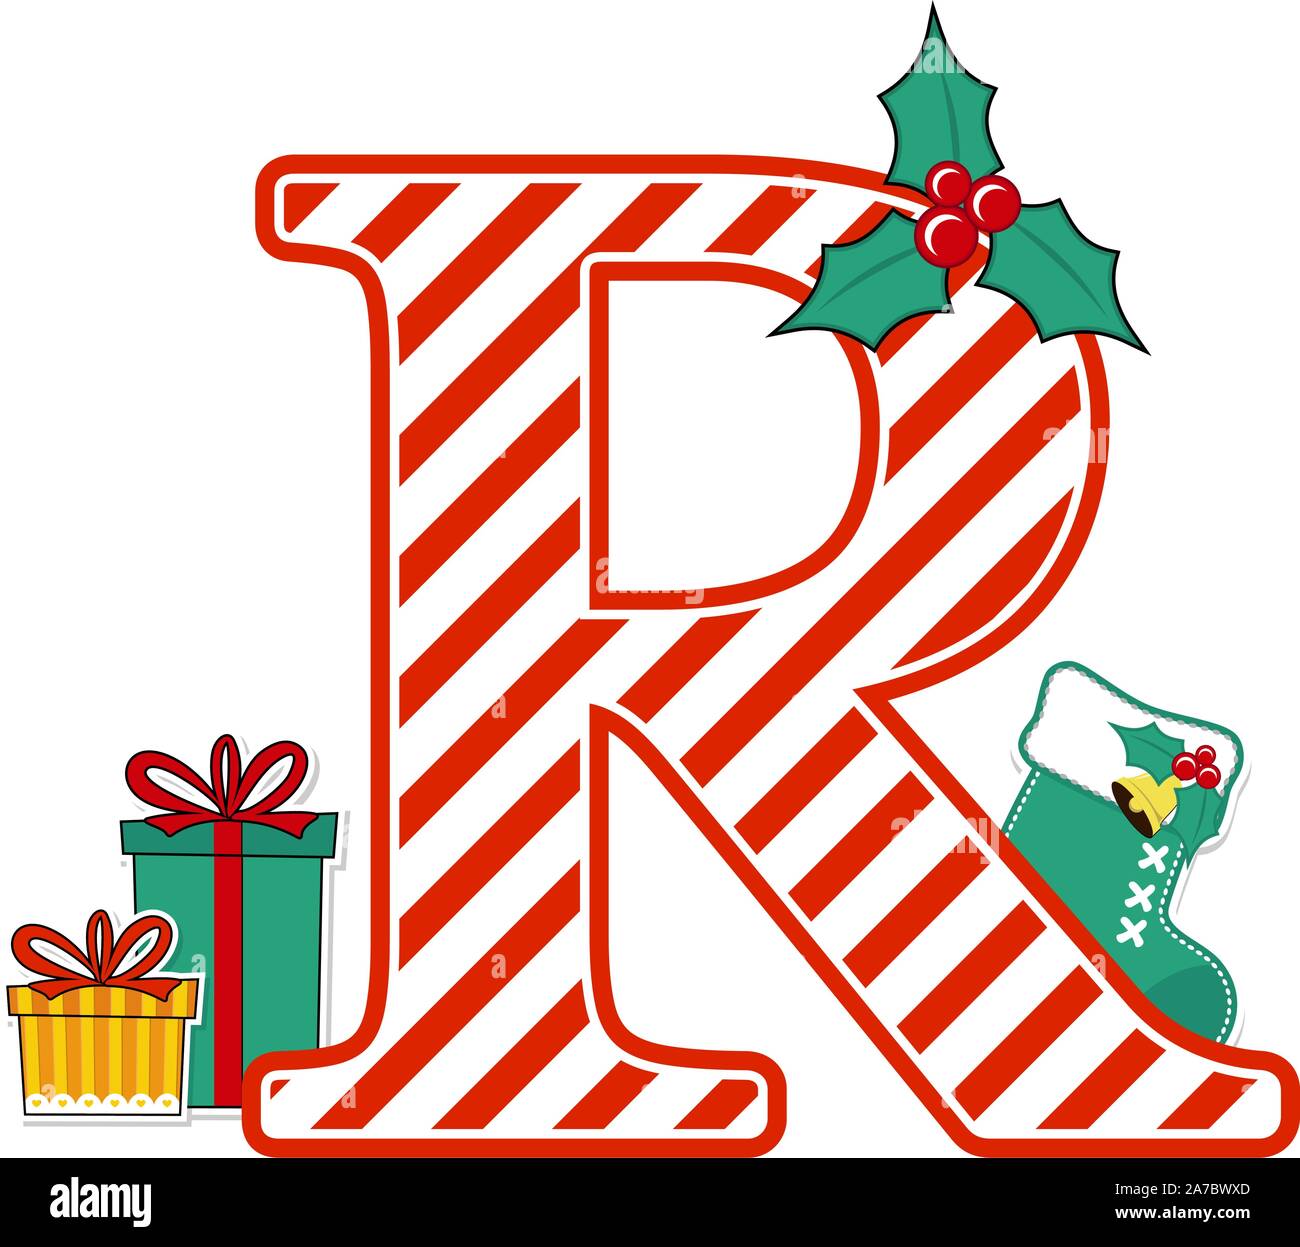 https://c8.alamy.com/comp/2A7BWXD/capital-letter-r-with-red-and-white-candy-cane-pattern-and-christmas-design-elements-isolated-on-white-background-can-be-used-for-holiday-season-card-2A7BWXD.jpg